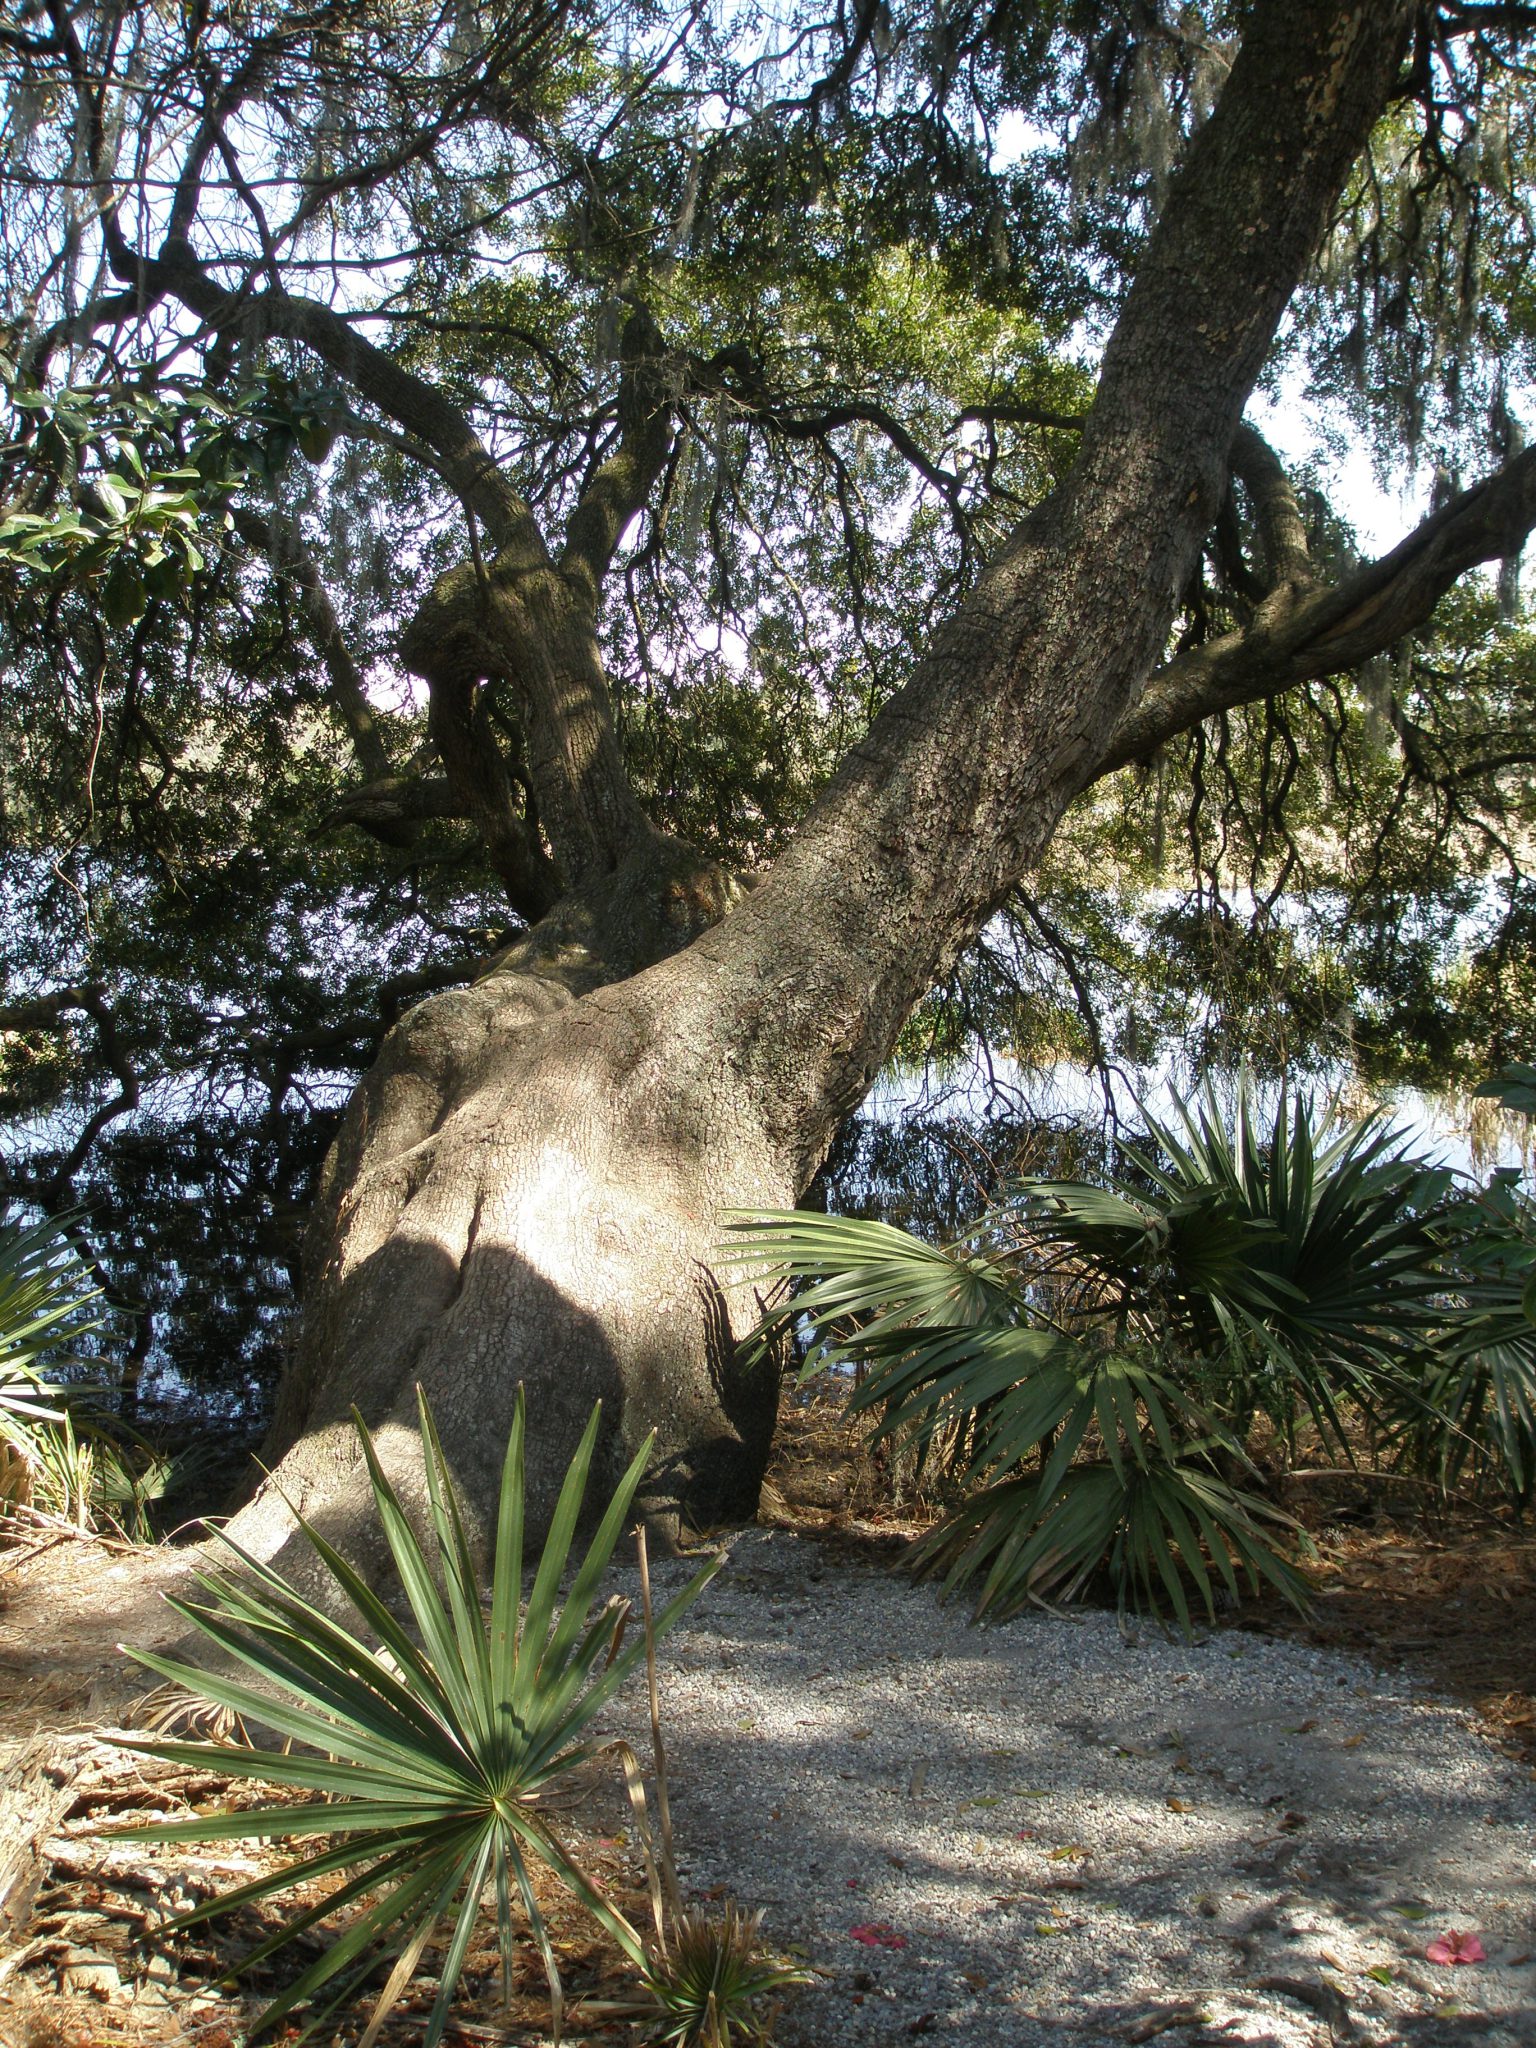 A prehistoric-looking tree at River's edge